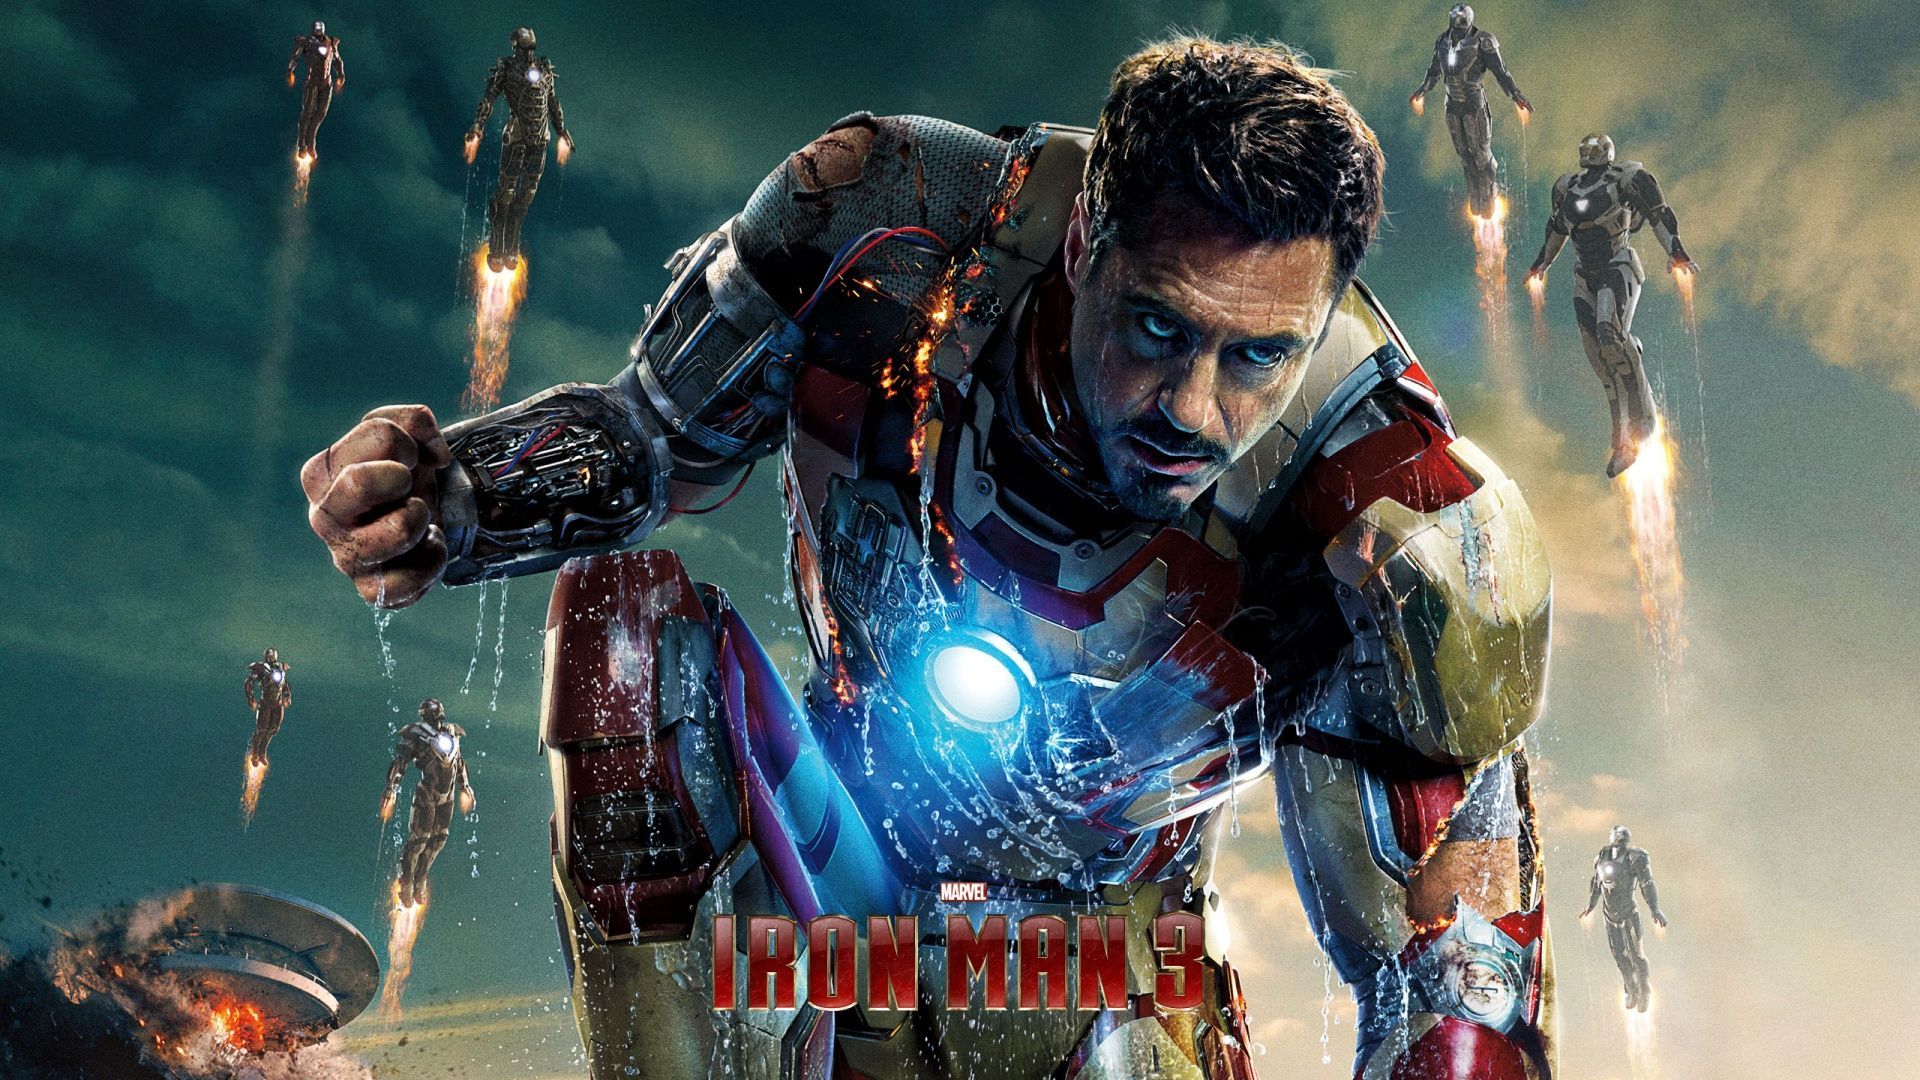 Iron Man 3 Movie Wallpapers | HD Wallpapers